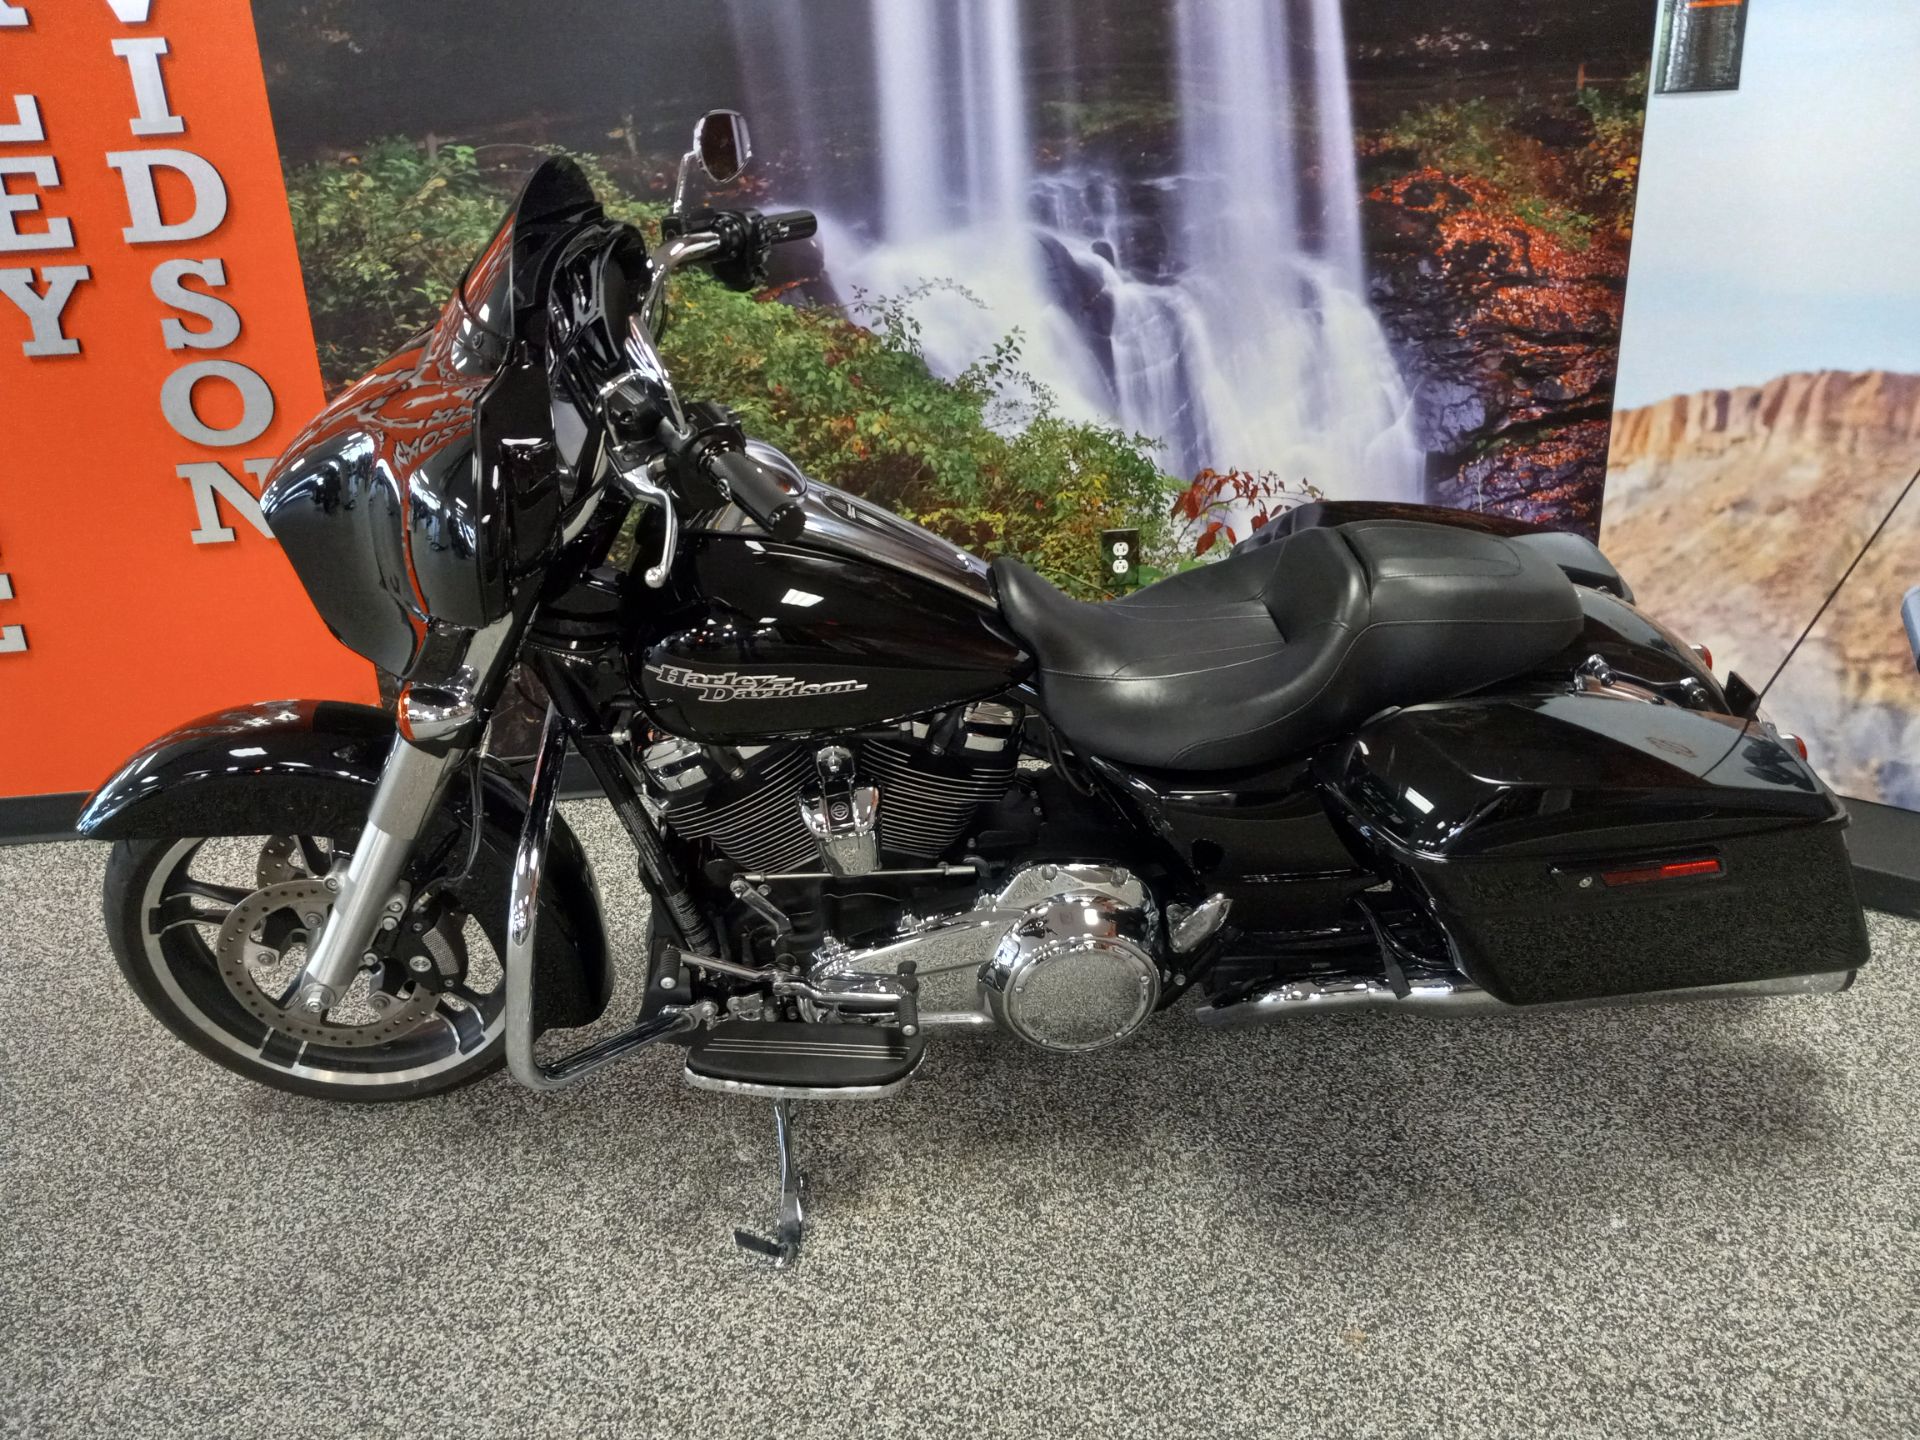 Used 2017 Harley Davidson Street Glide Special Vivid Black Motorcycles In Knoxville Tn N A